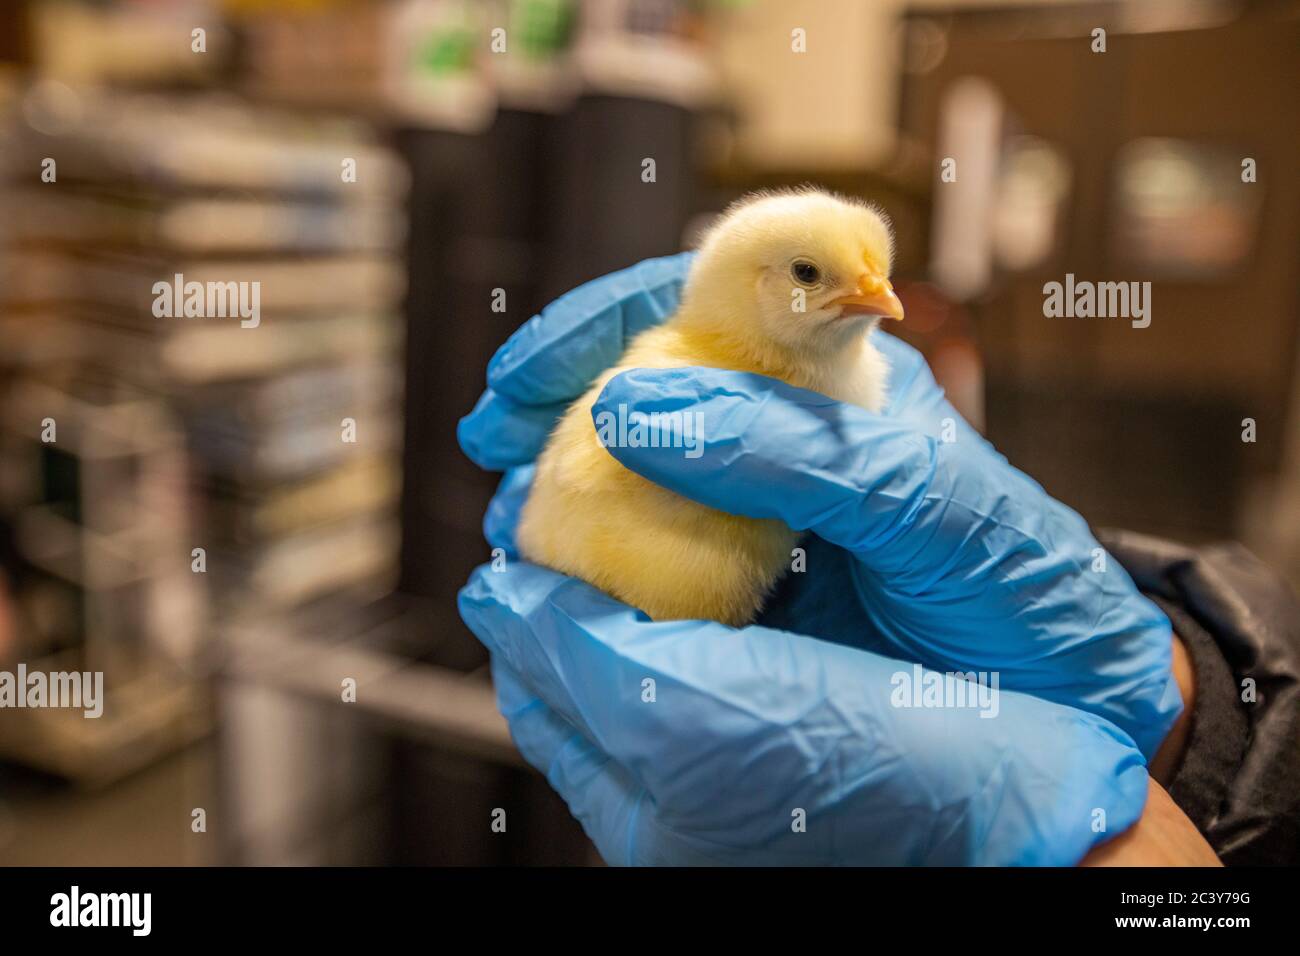 Person in latex gloves holding small chicken Stock Photo